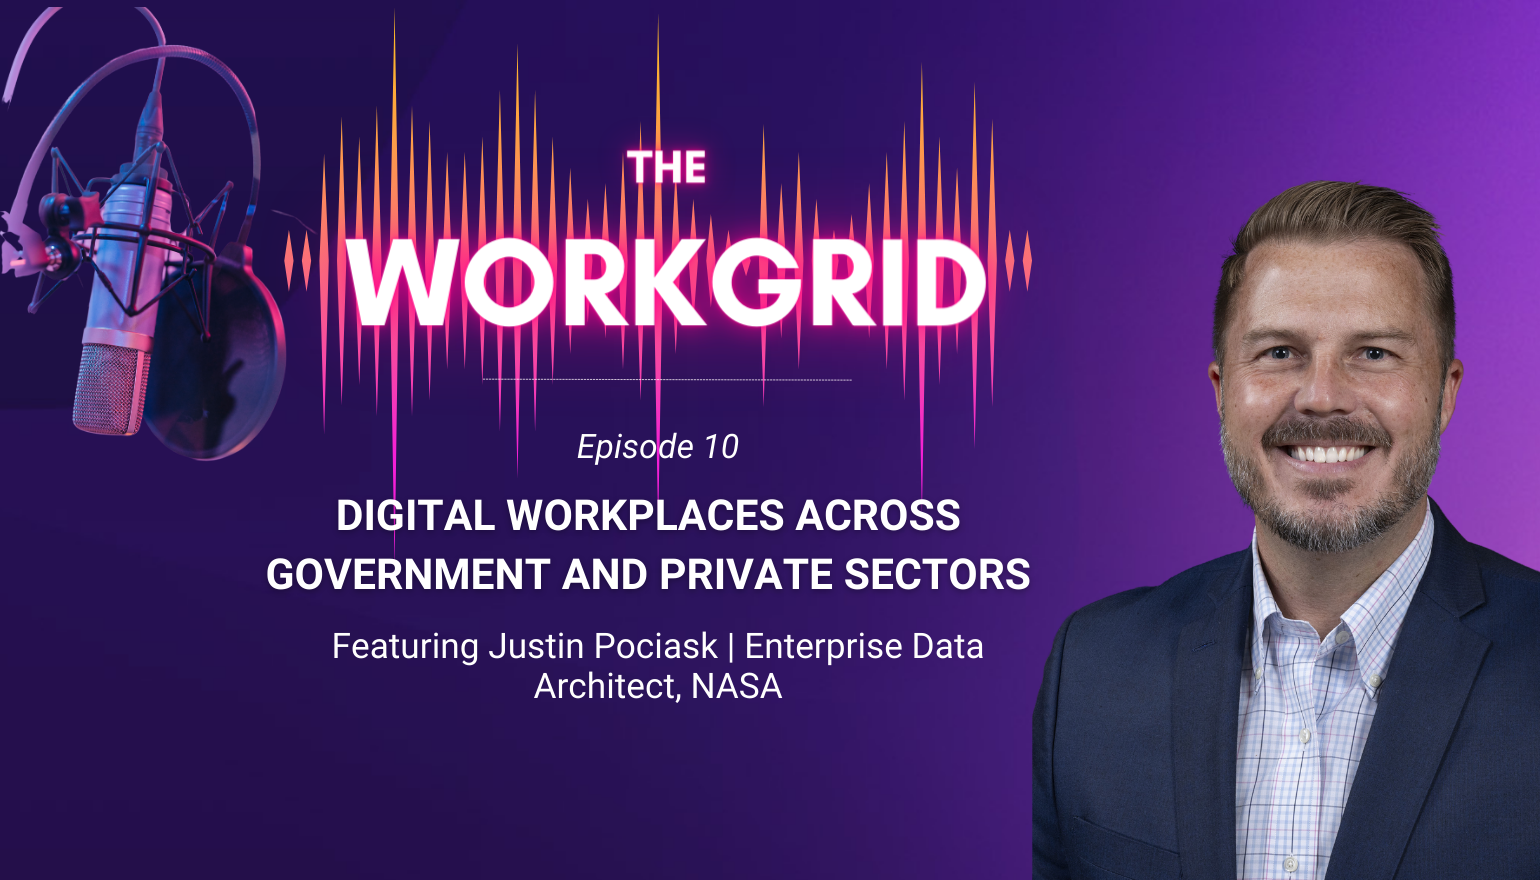 The Workgrid Podcast | Digital Workplaces Across Government and Private Sectors